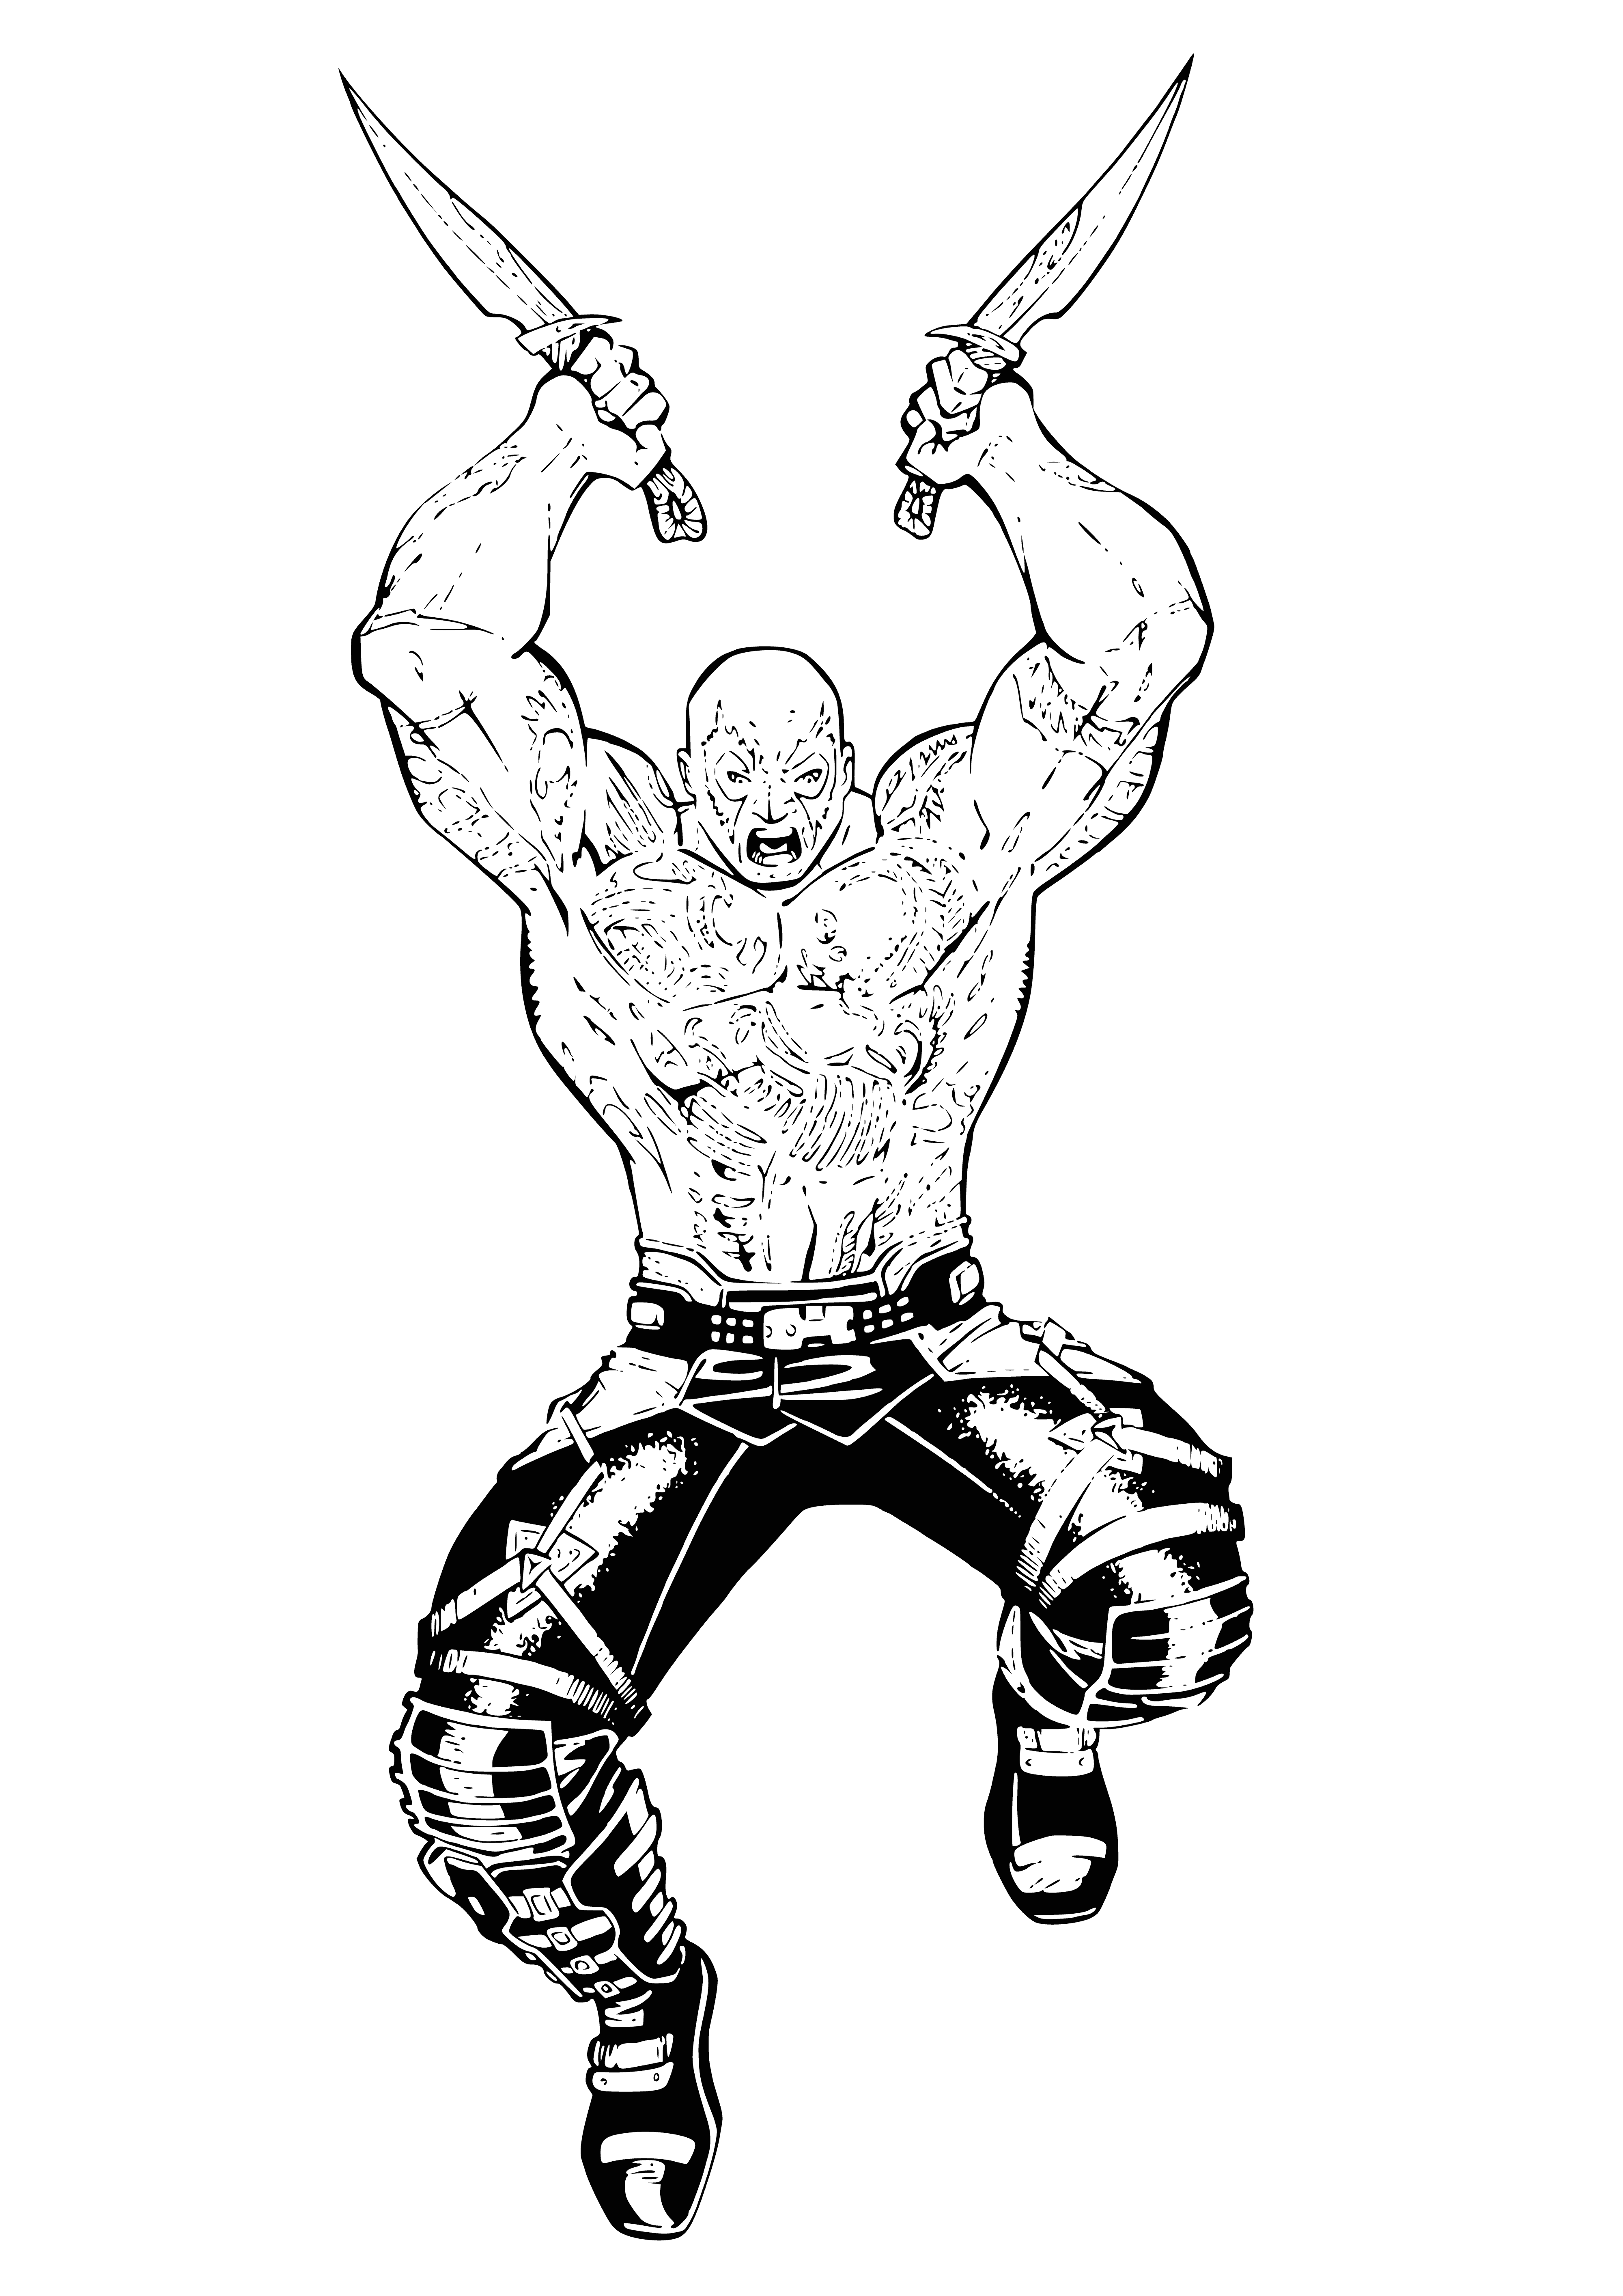 Drax the Destroyer coloring page